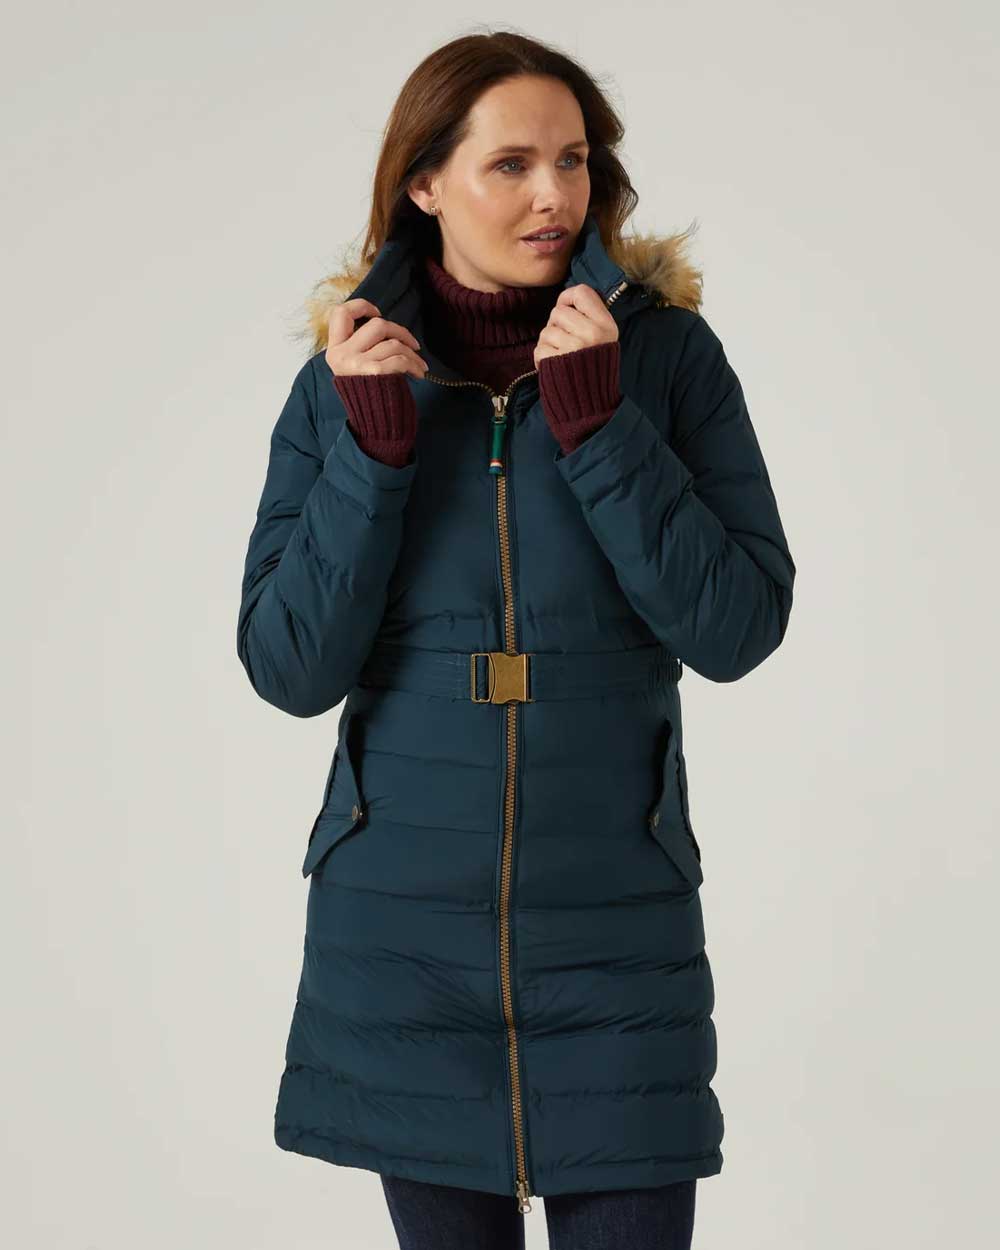 Alan Paine Calsall Ladies Jacket in Olive 